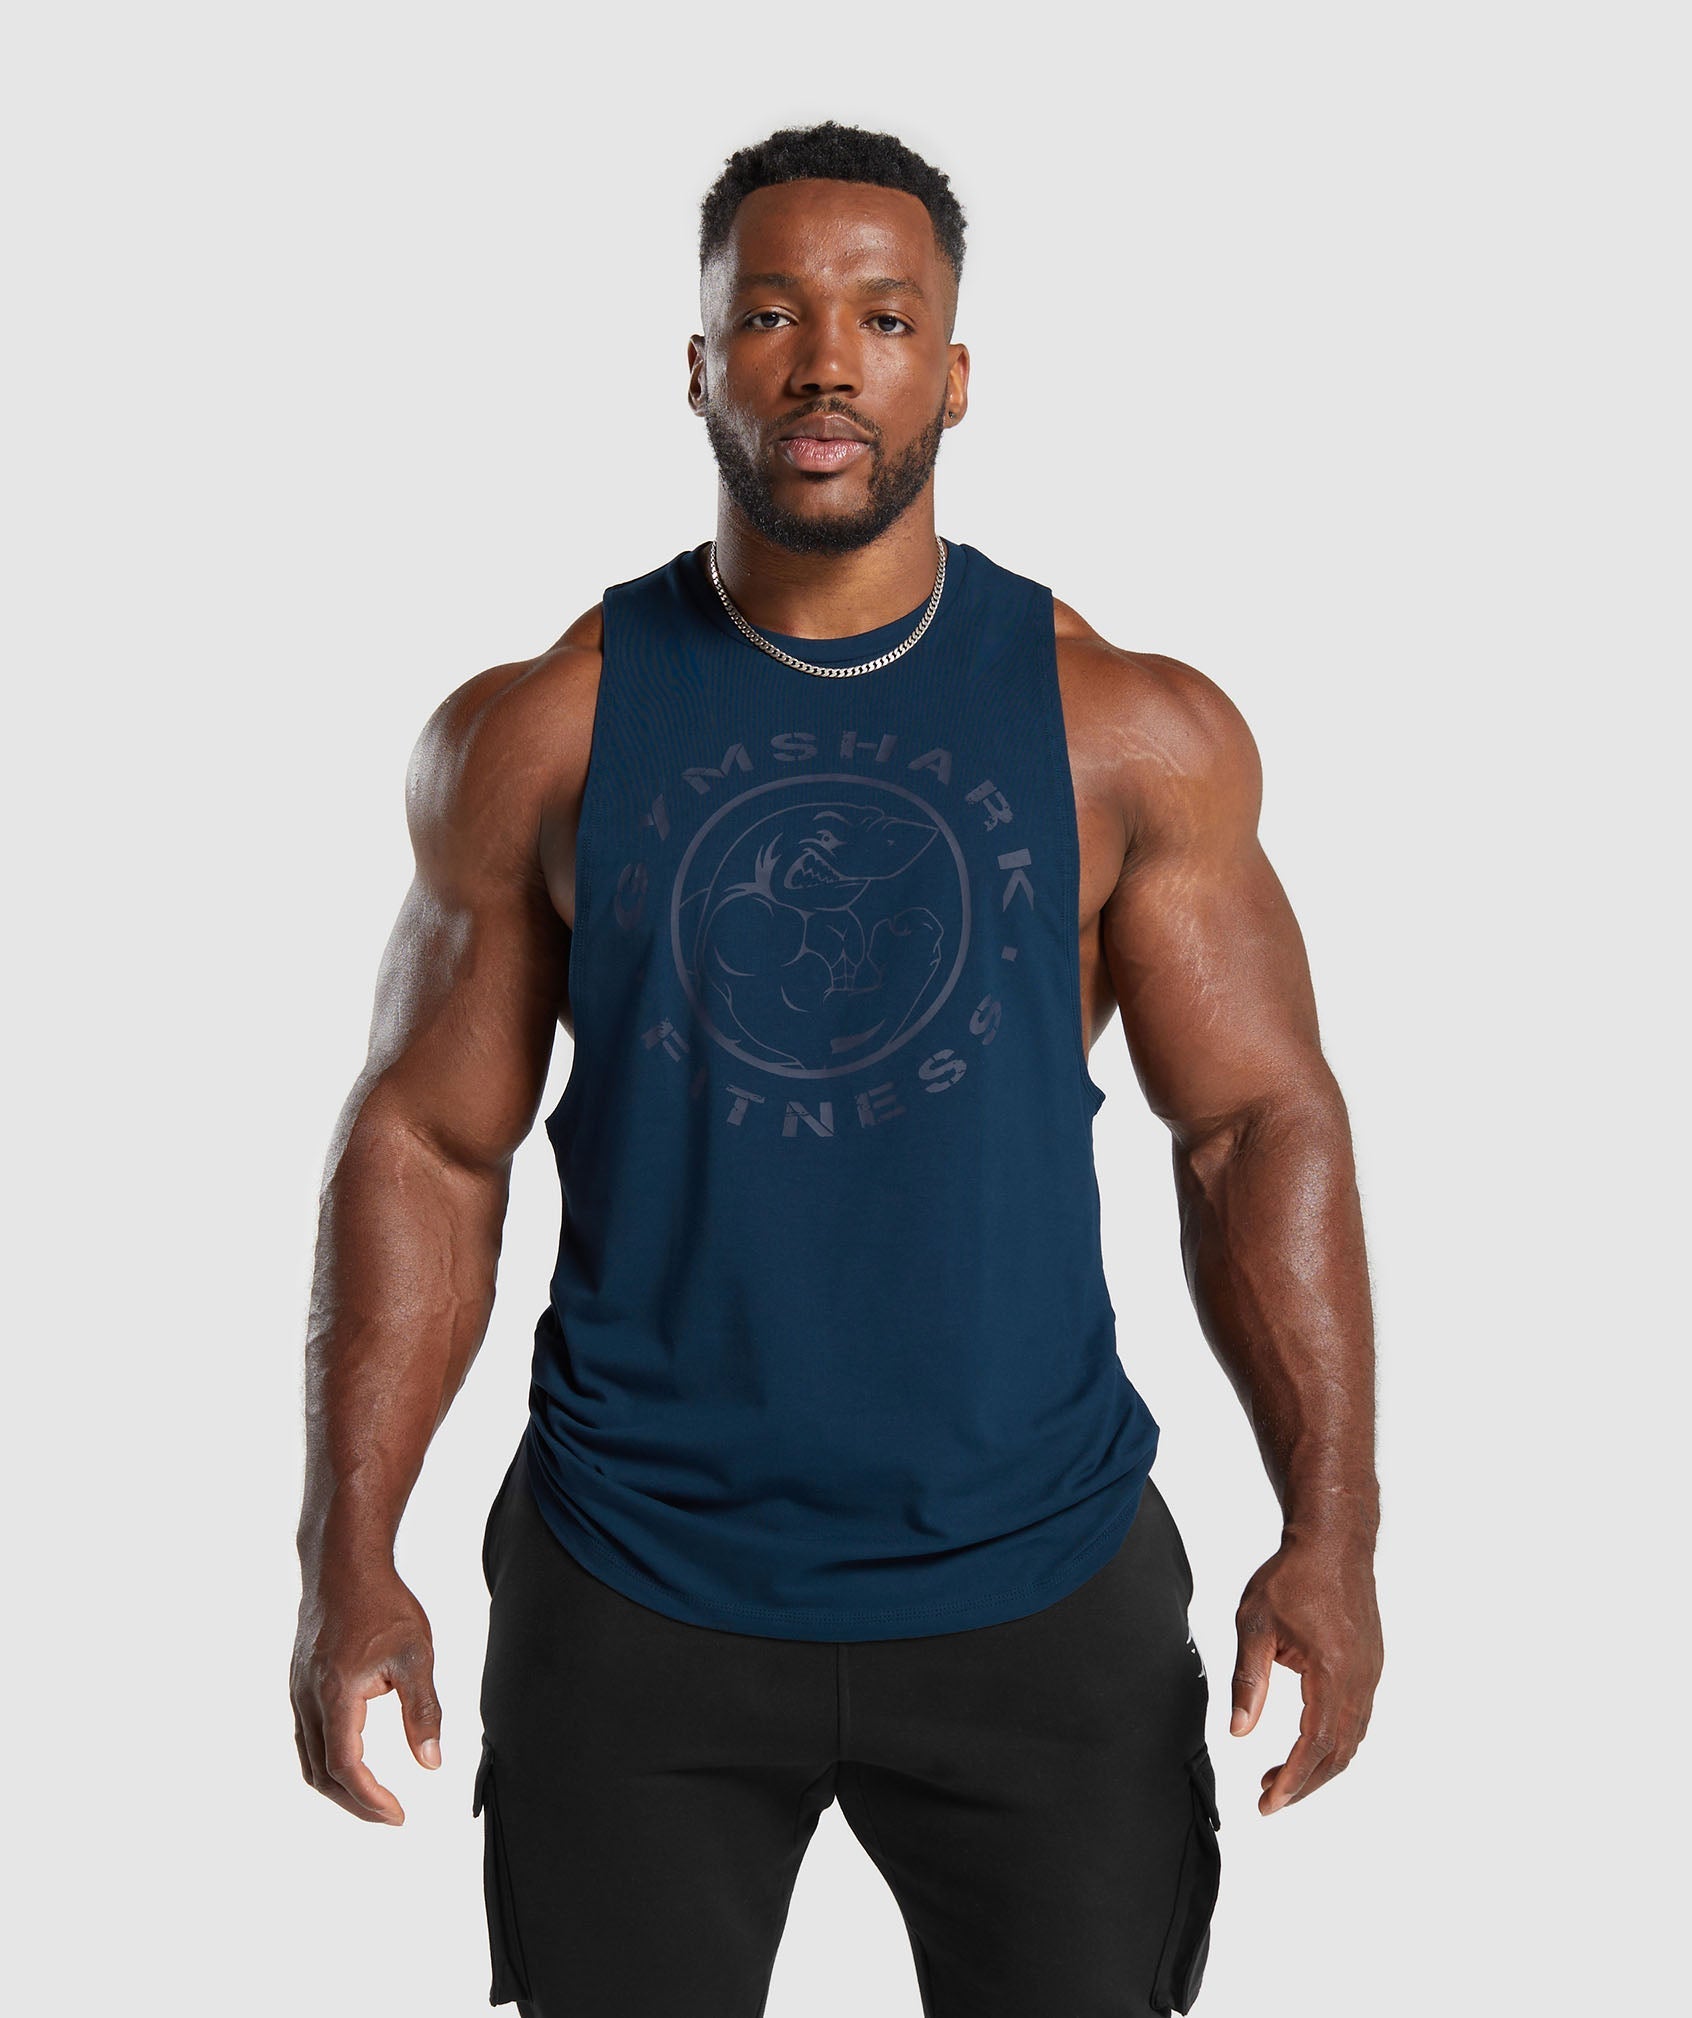 Legacy Drop Arm Tank in Navy is out of stock